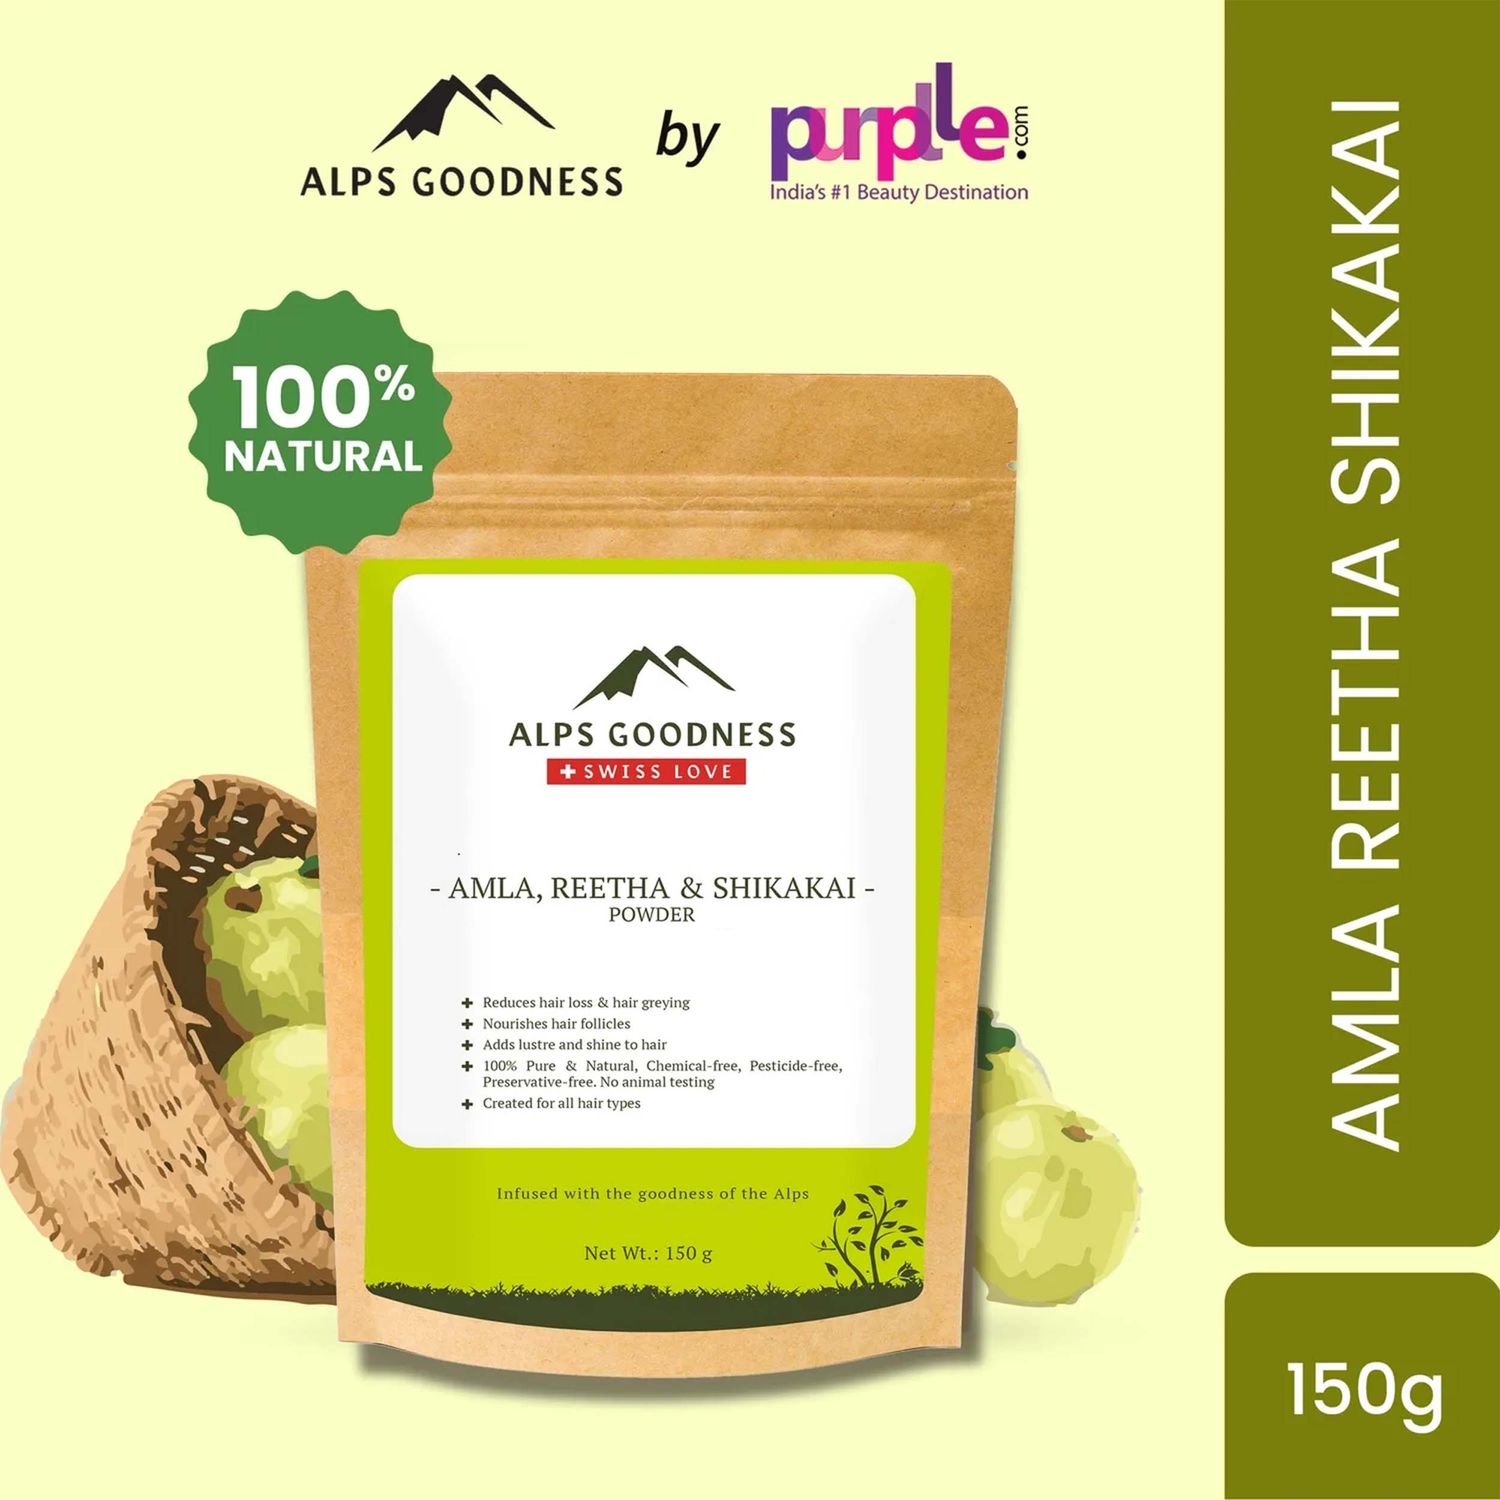 Buy Alps Goodness Amla Reetha & Shikakai Powder 150 gm| 100% Natural Powder | No Chemicals, No Preservatives, No Pesticides | Promotes Hair Growth| Hair Mask | Strenghtens Hair | For silky smooth hair - Purplle